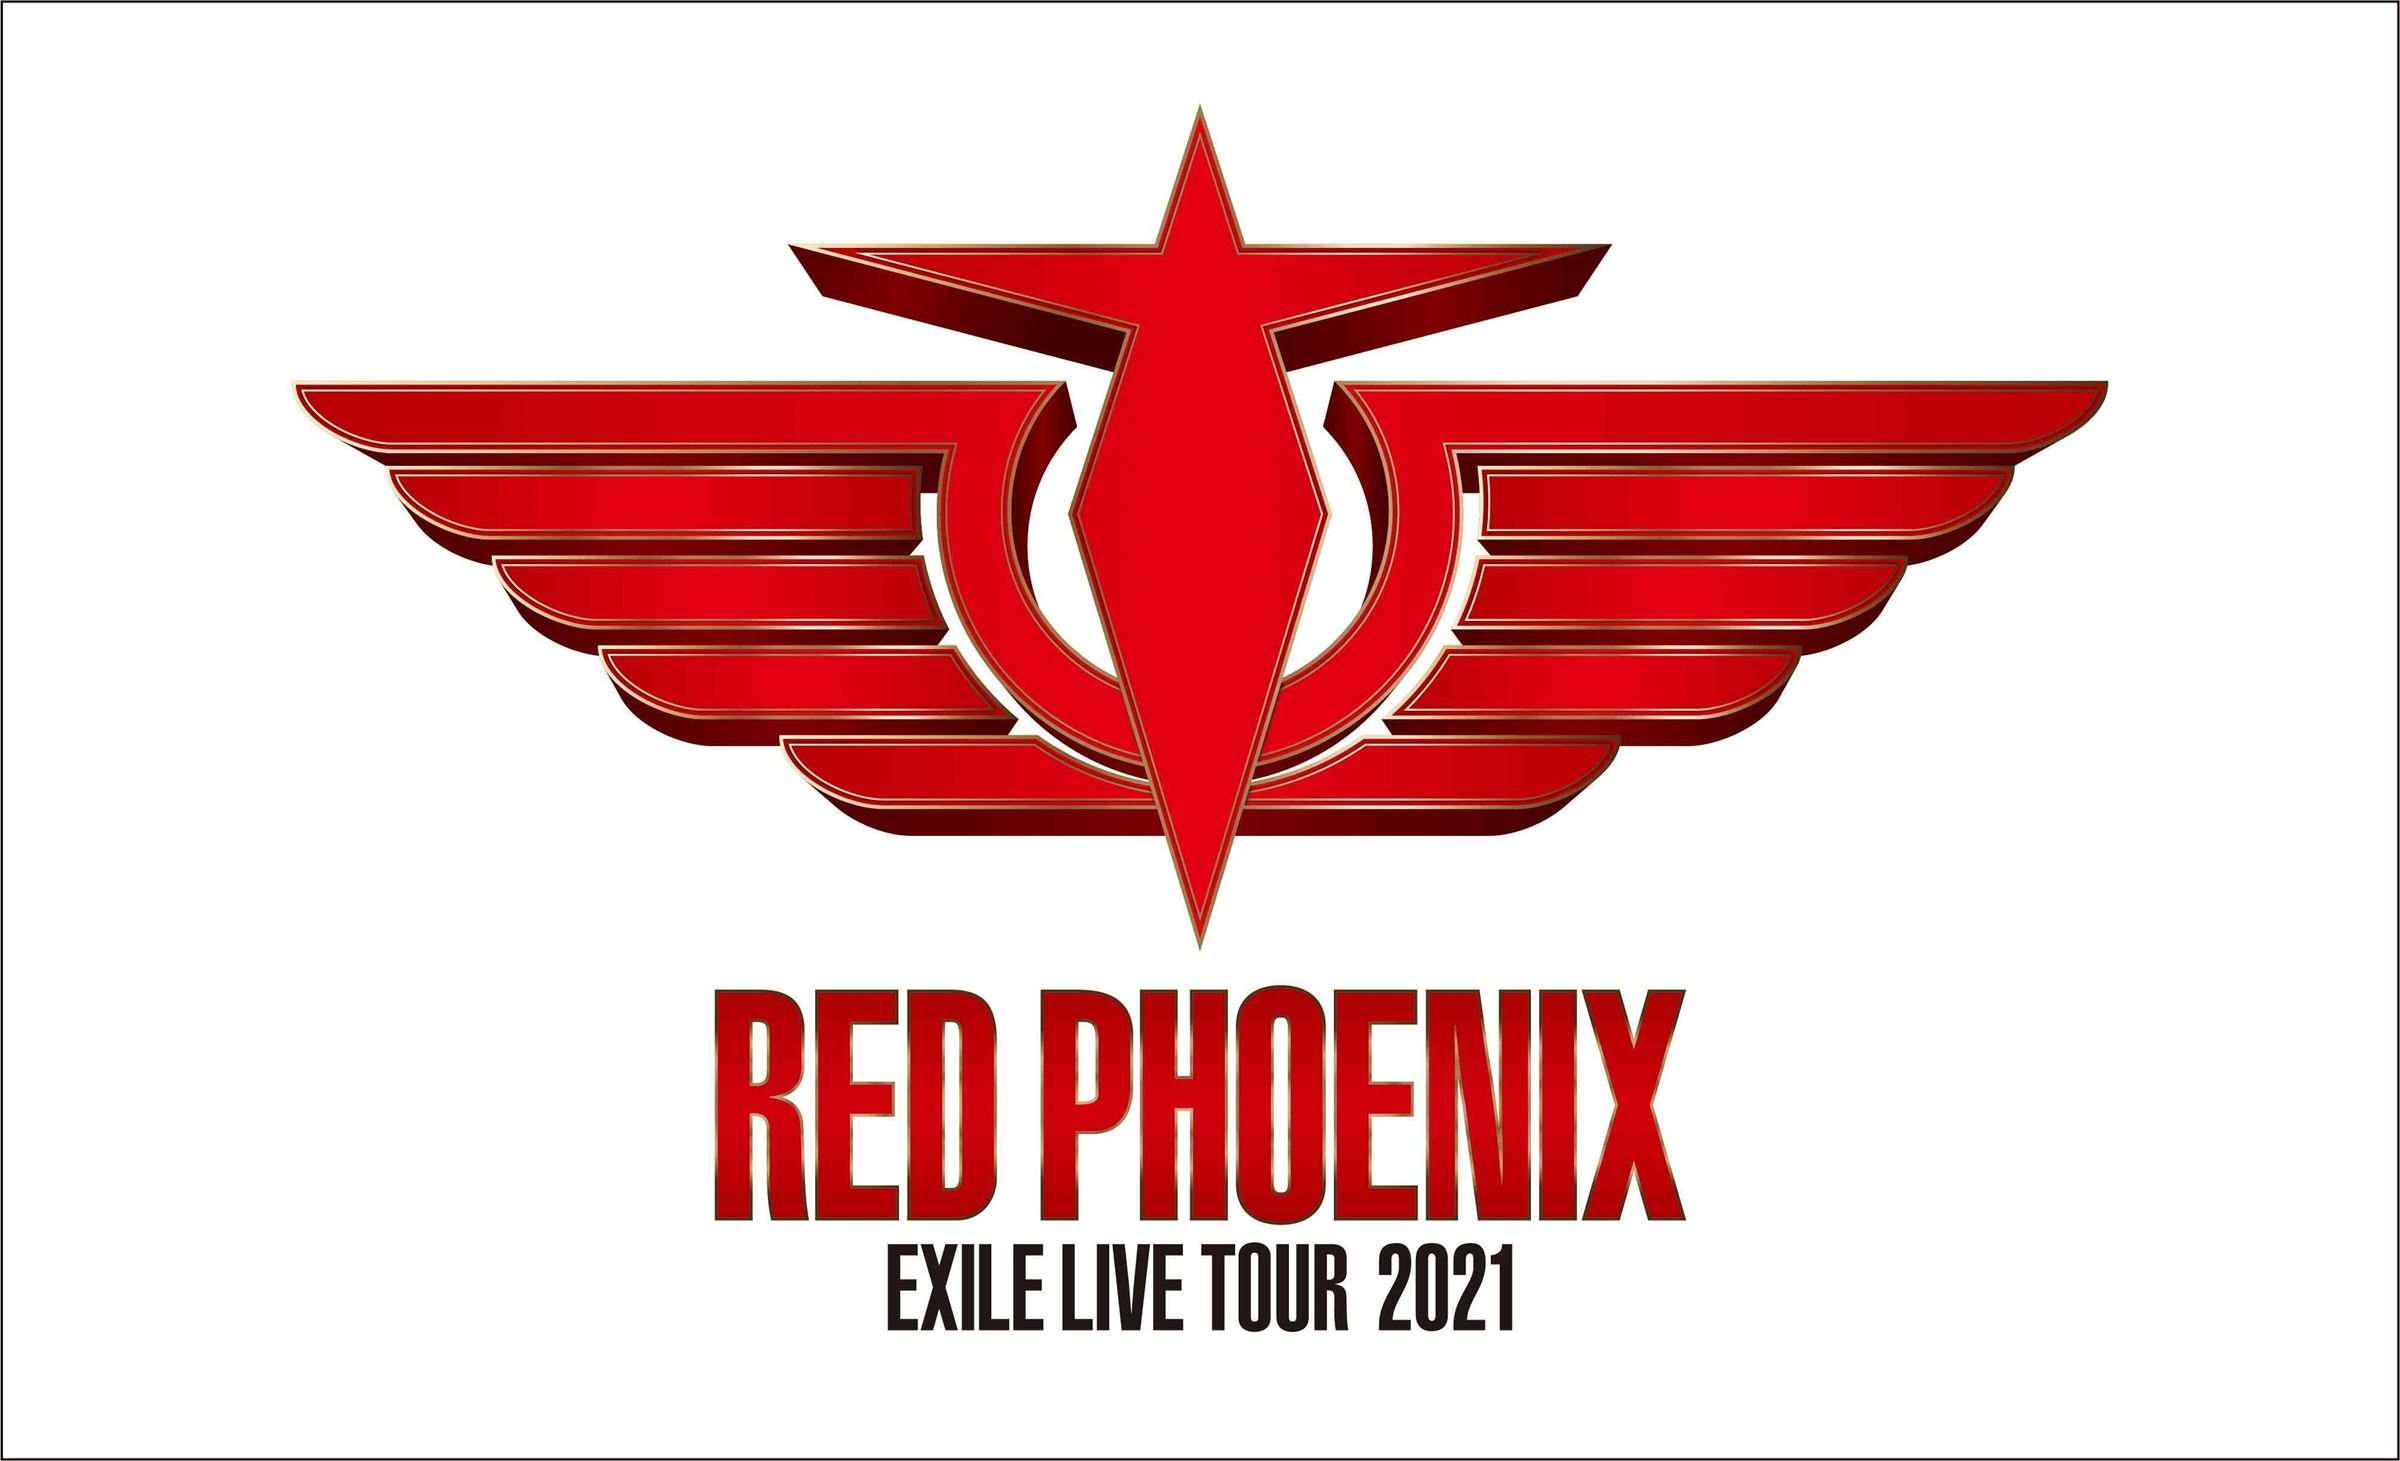 『EXILE LIVE TOUR 2021 “RED PHOENIX”』ロゴ